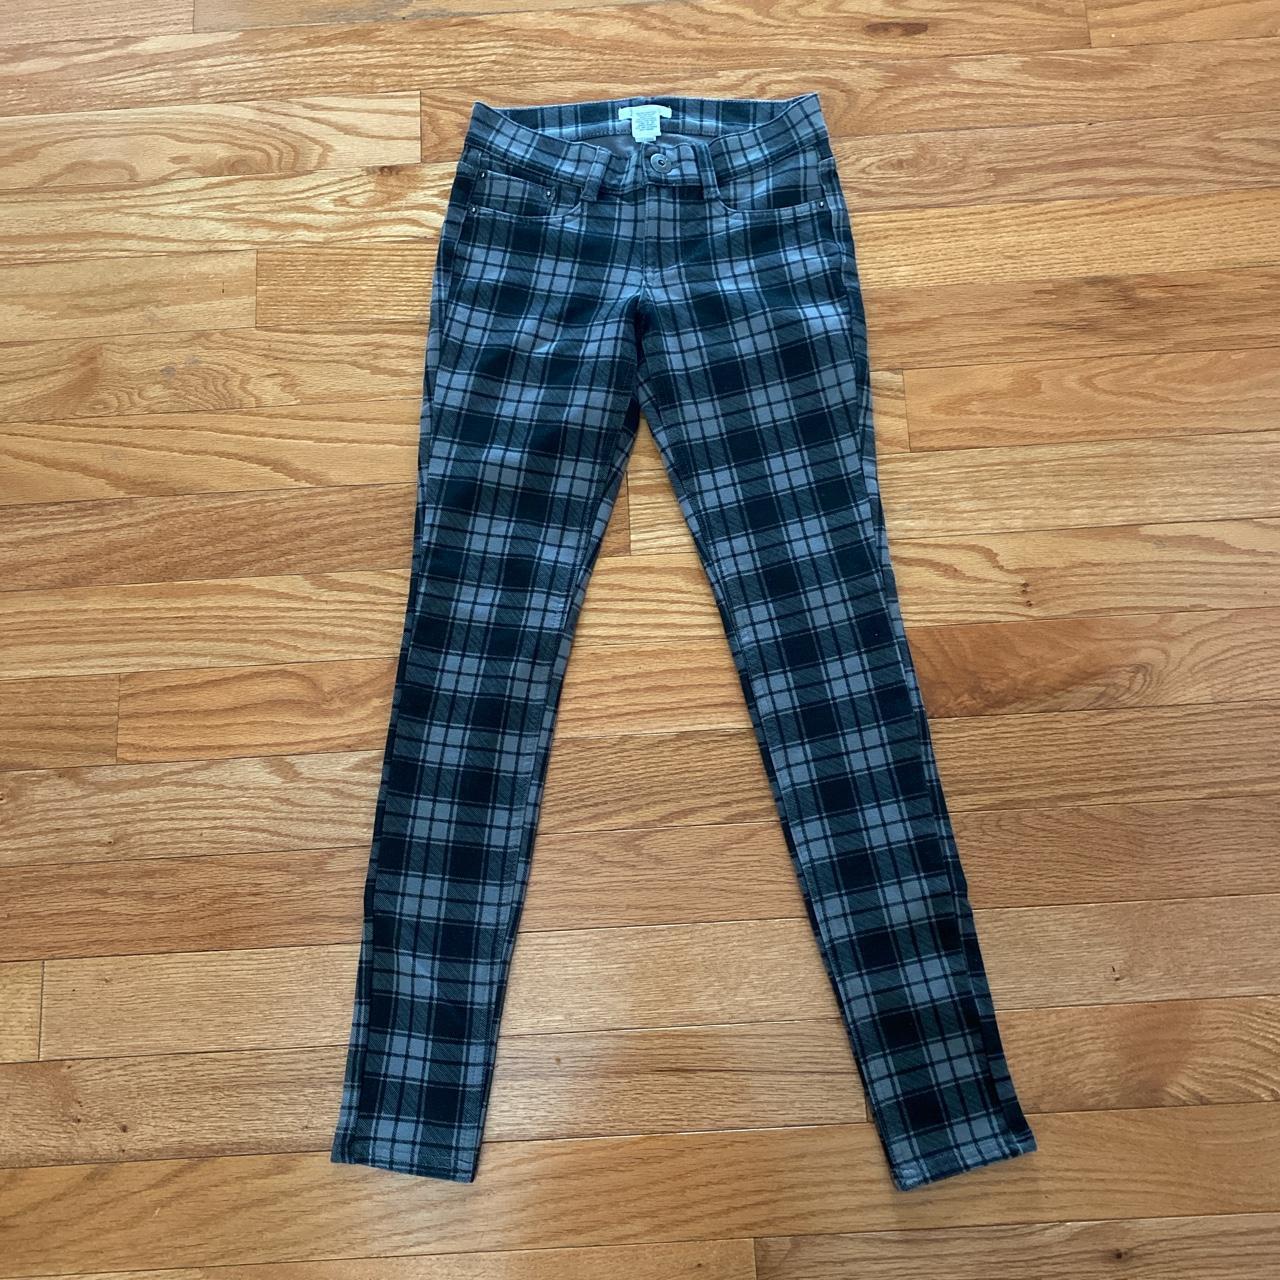 This is a vintage pair of Mudd black and gray... - Depop